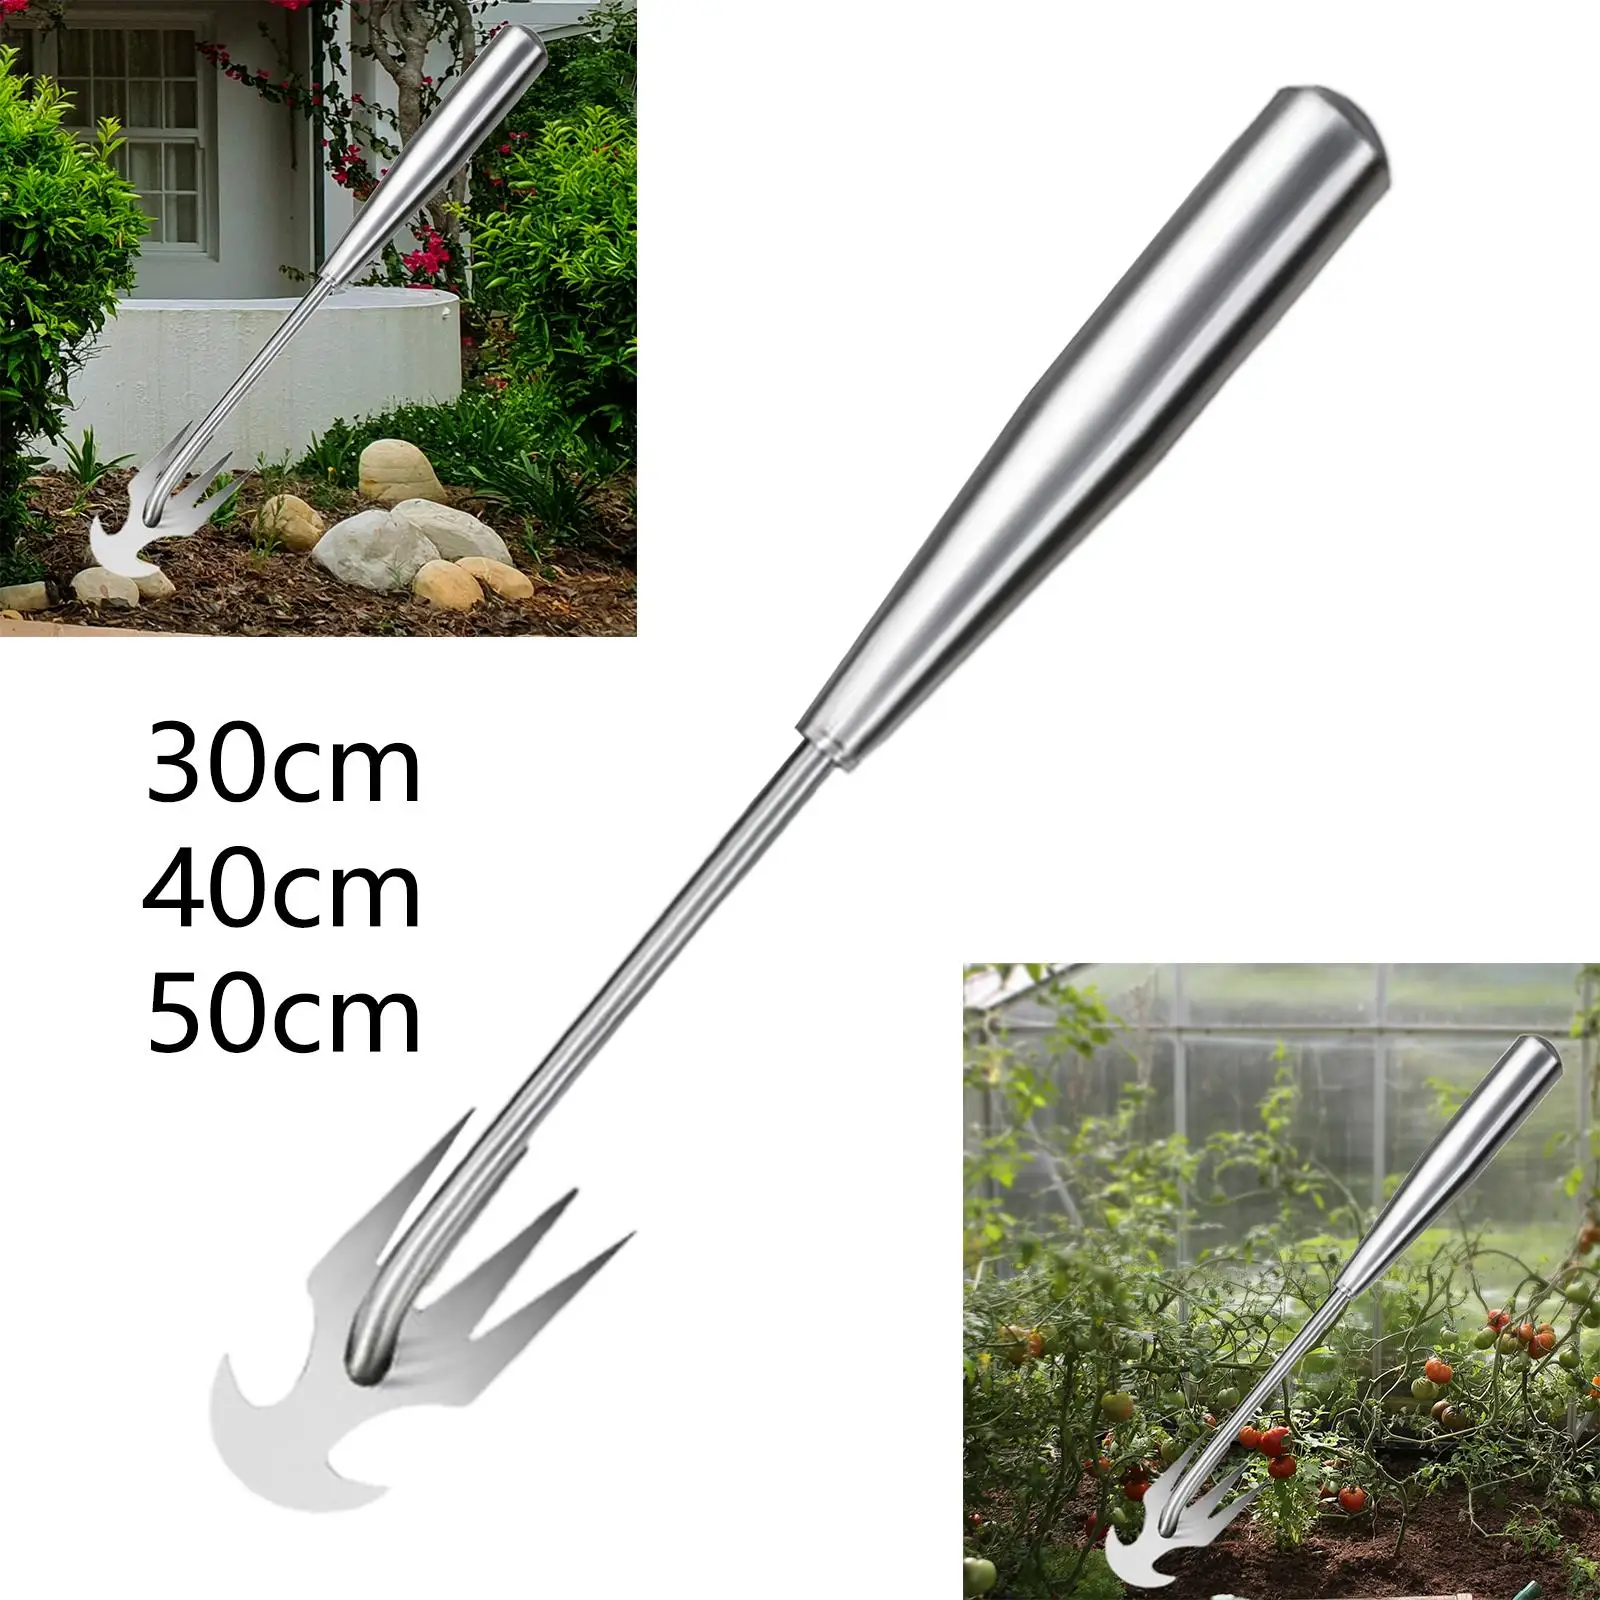 Manual Hand Weeder Tool Gardening Hoes Garden Weeder Hand Tool Uprooting Weeding Tool for Gardening Planting Cultivating Plowing